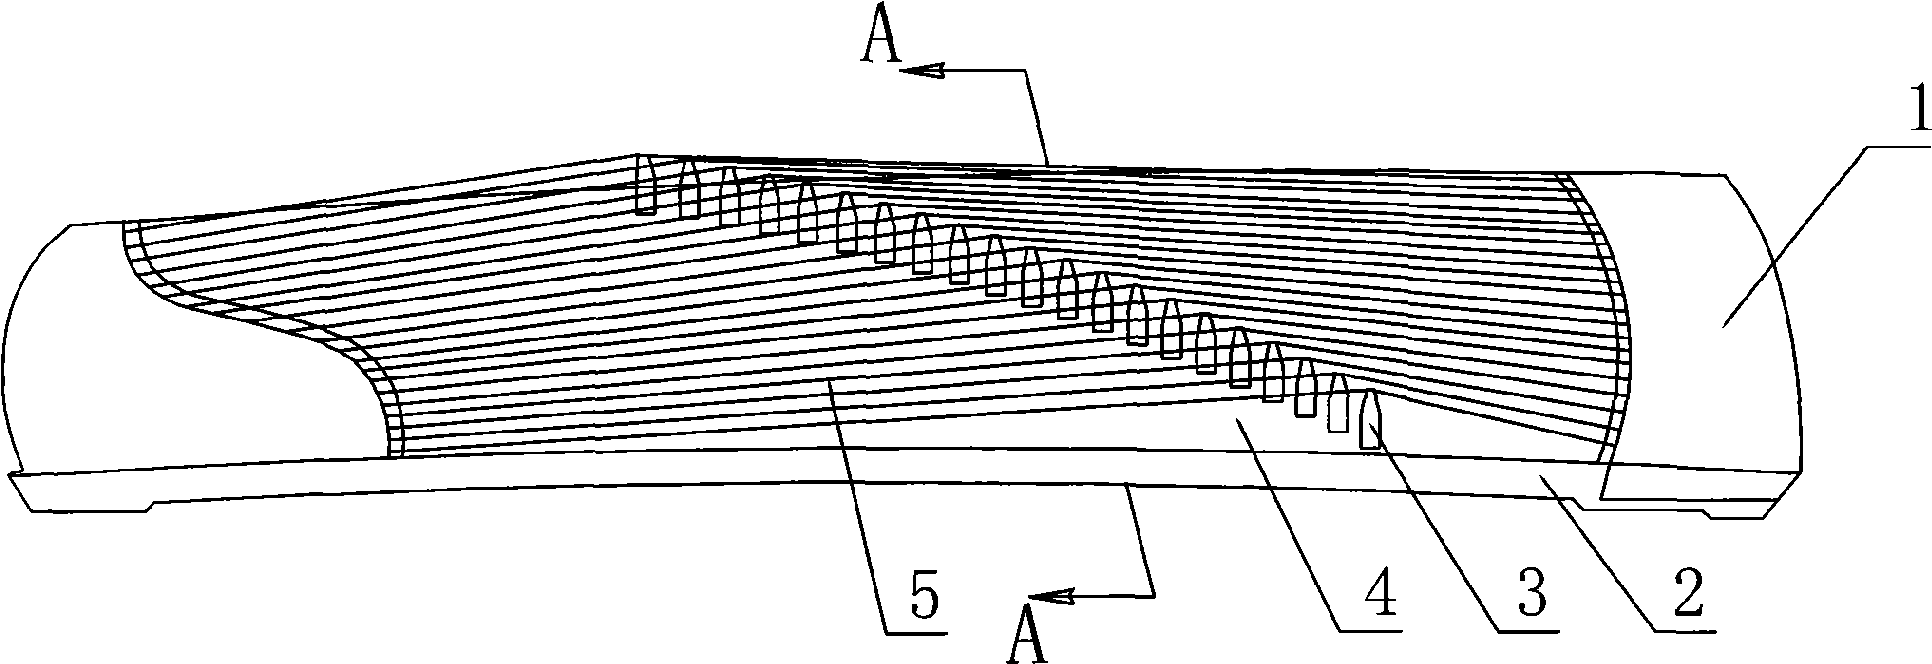 Double-arc Chinese zither